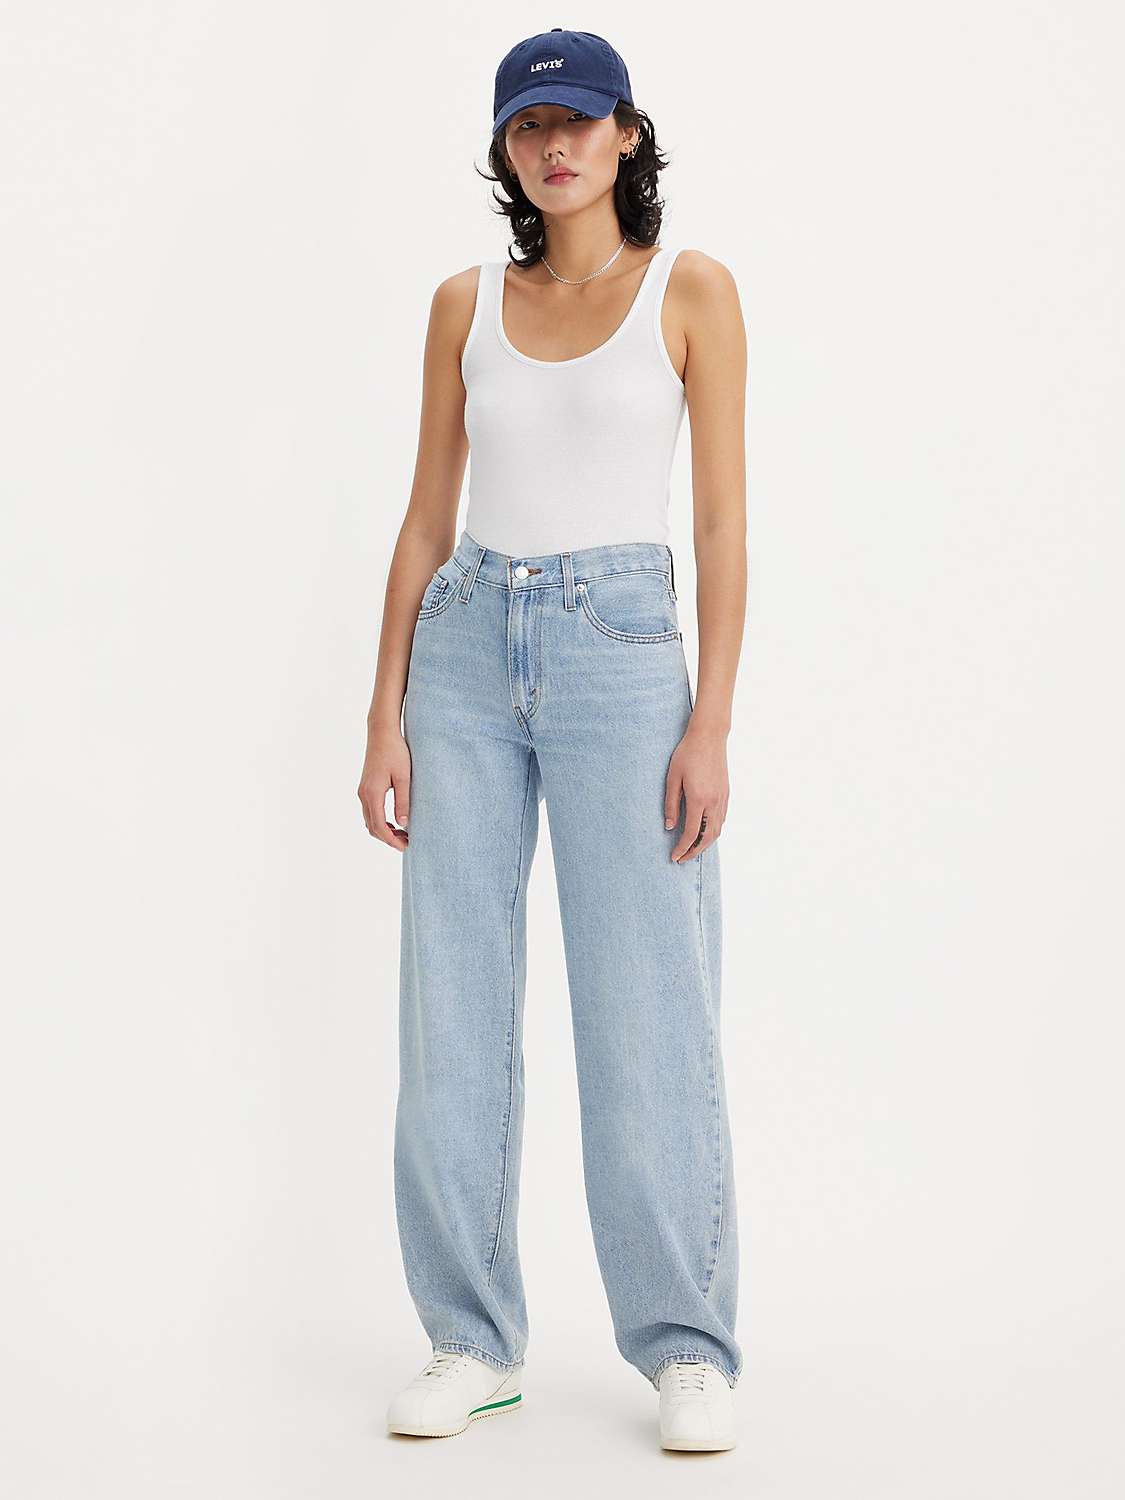 Buy Levi's Baggy Dad Straight Leg Jeans, Make A Difference Online at johnlewis.com